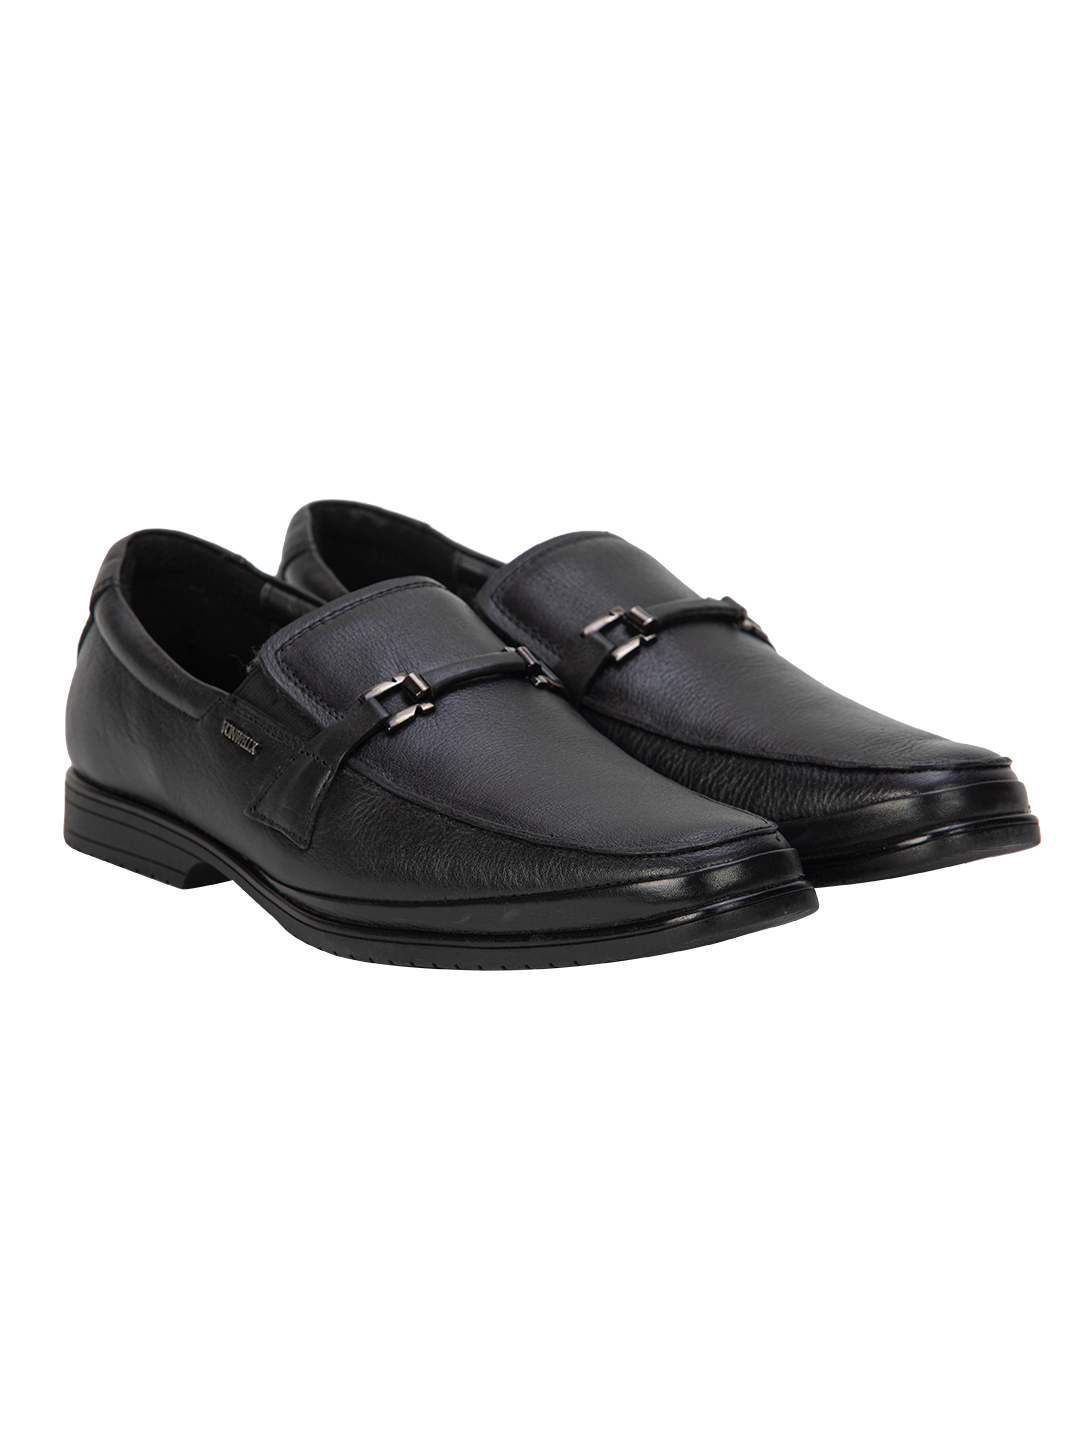 Buy Von Wellx Germany Comfort Black Jace Shoes Online in Udaipur